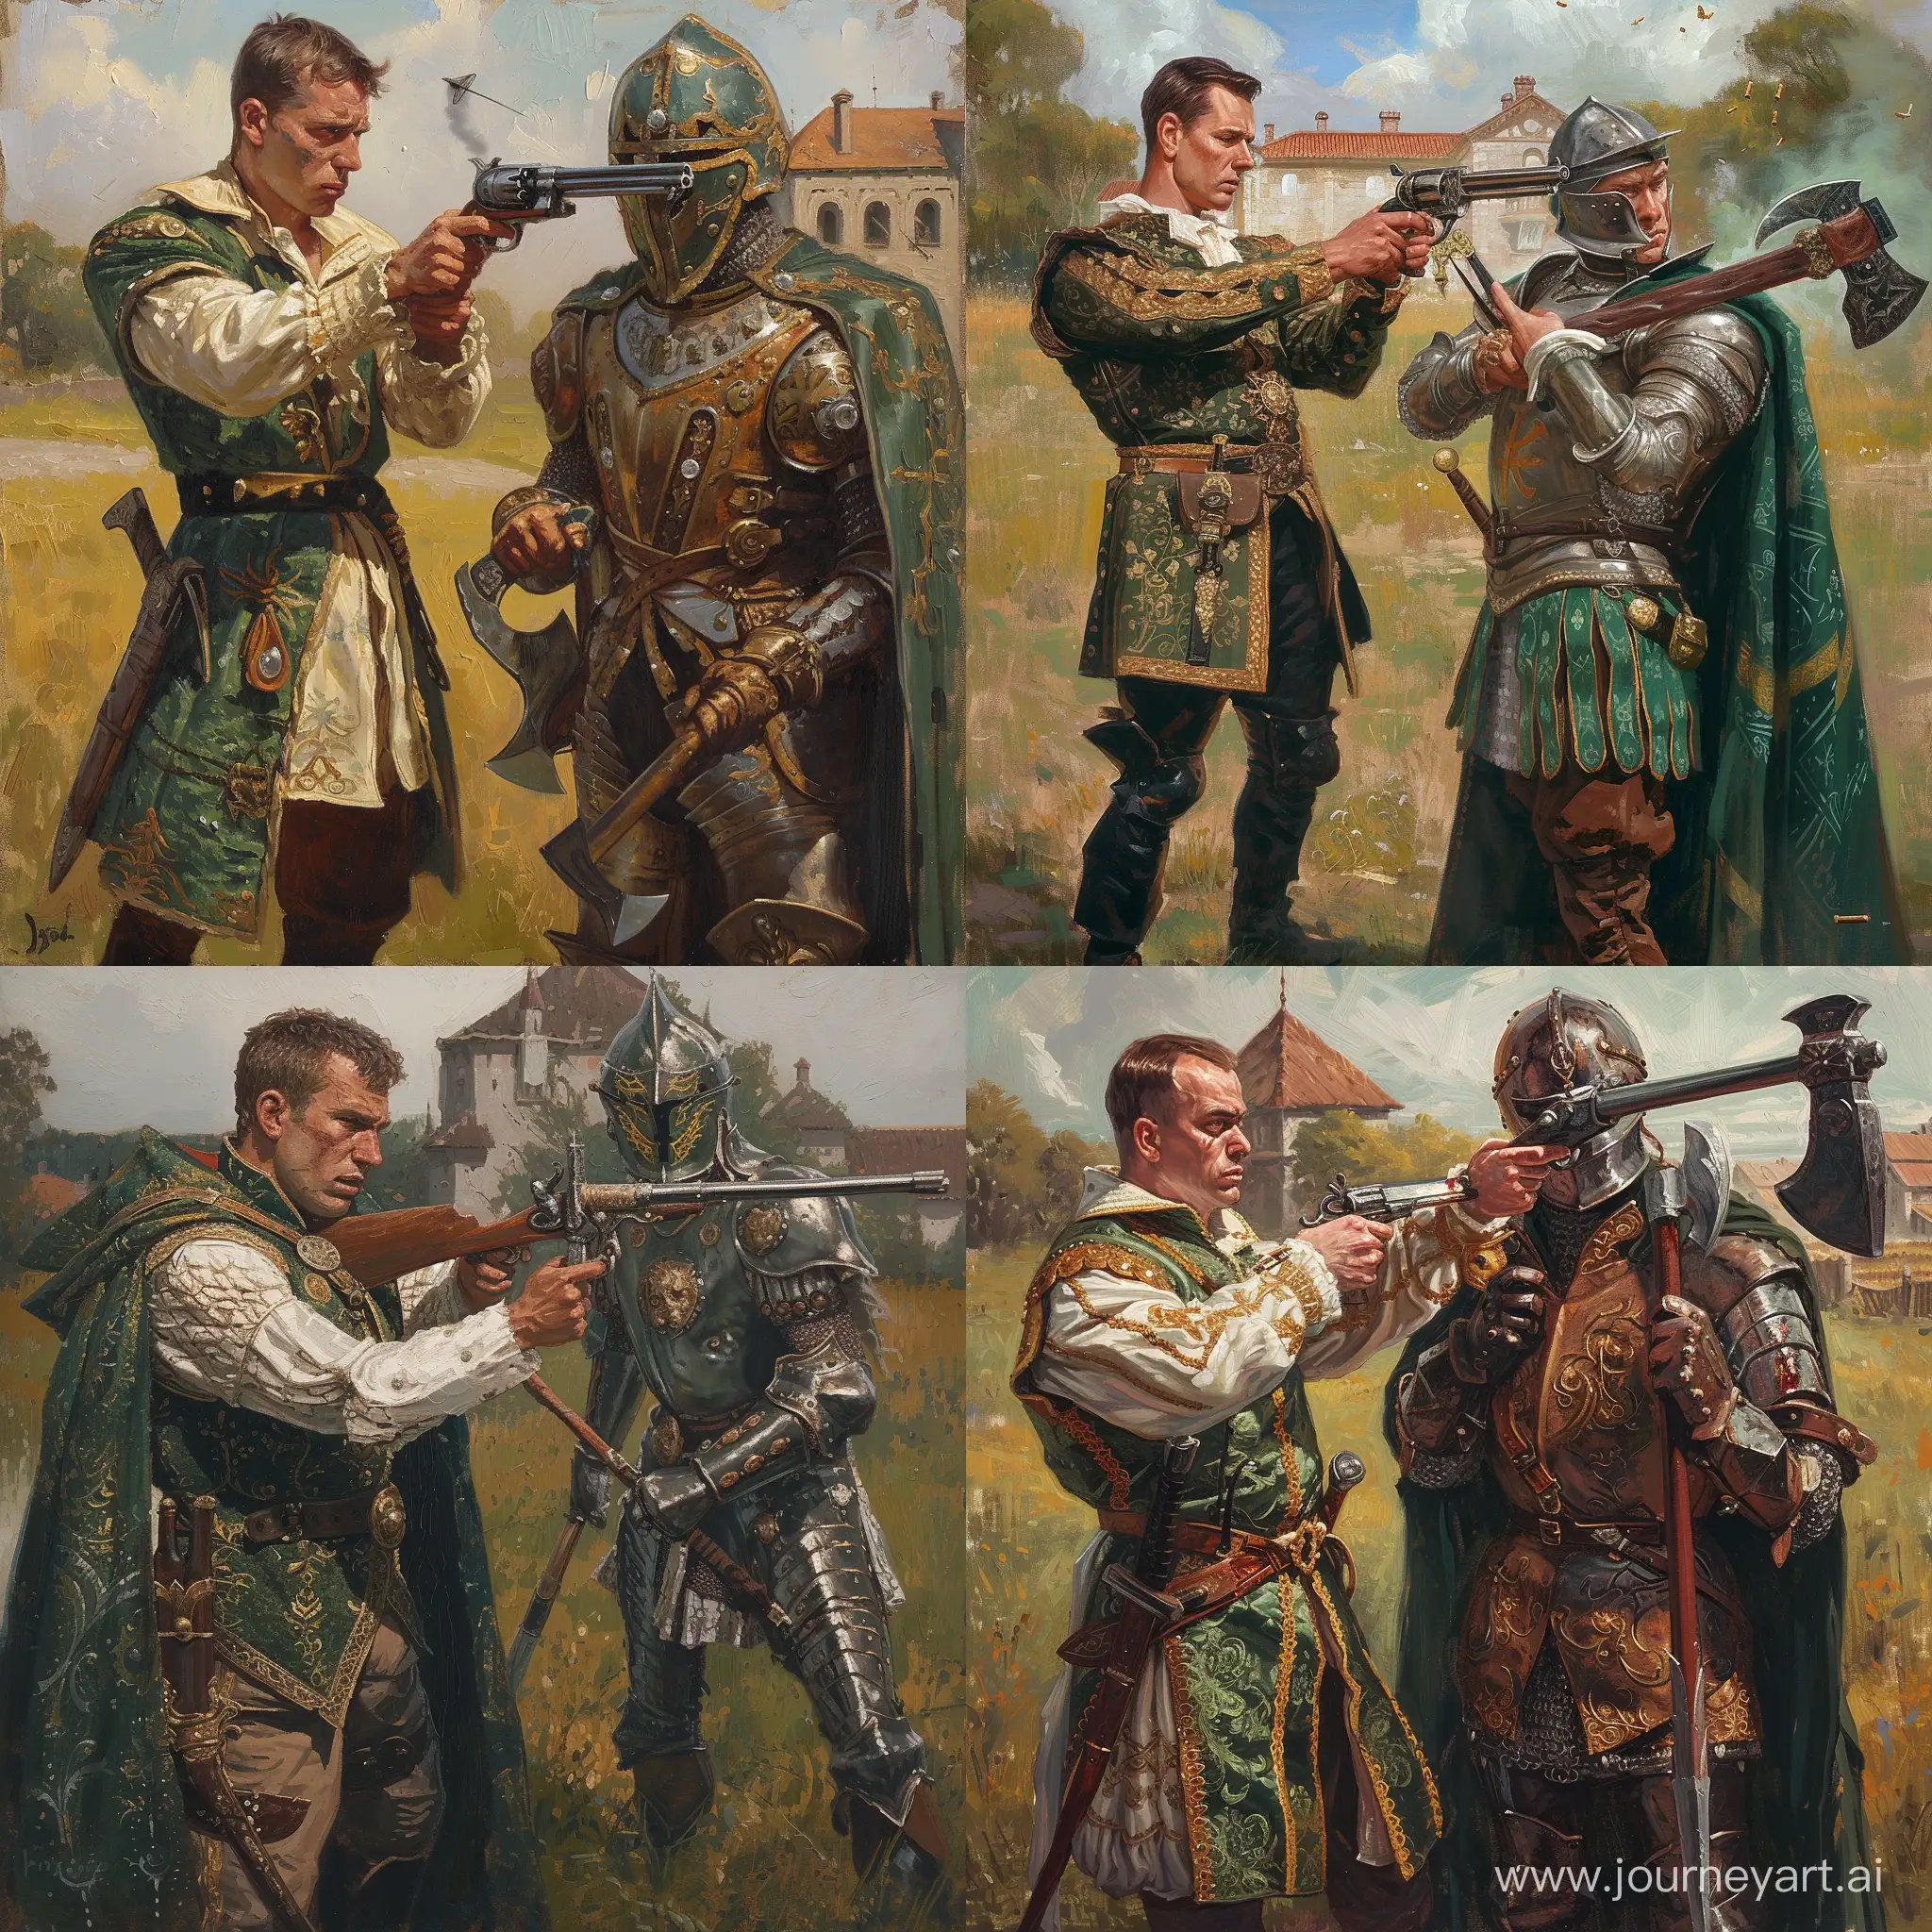 Fantasy-Merchant-and-Knight-Painting-Aristocratic-Scene-with-Medieval-Pistol-and-Battle-Axe